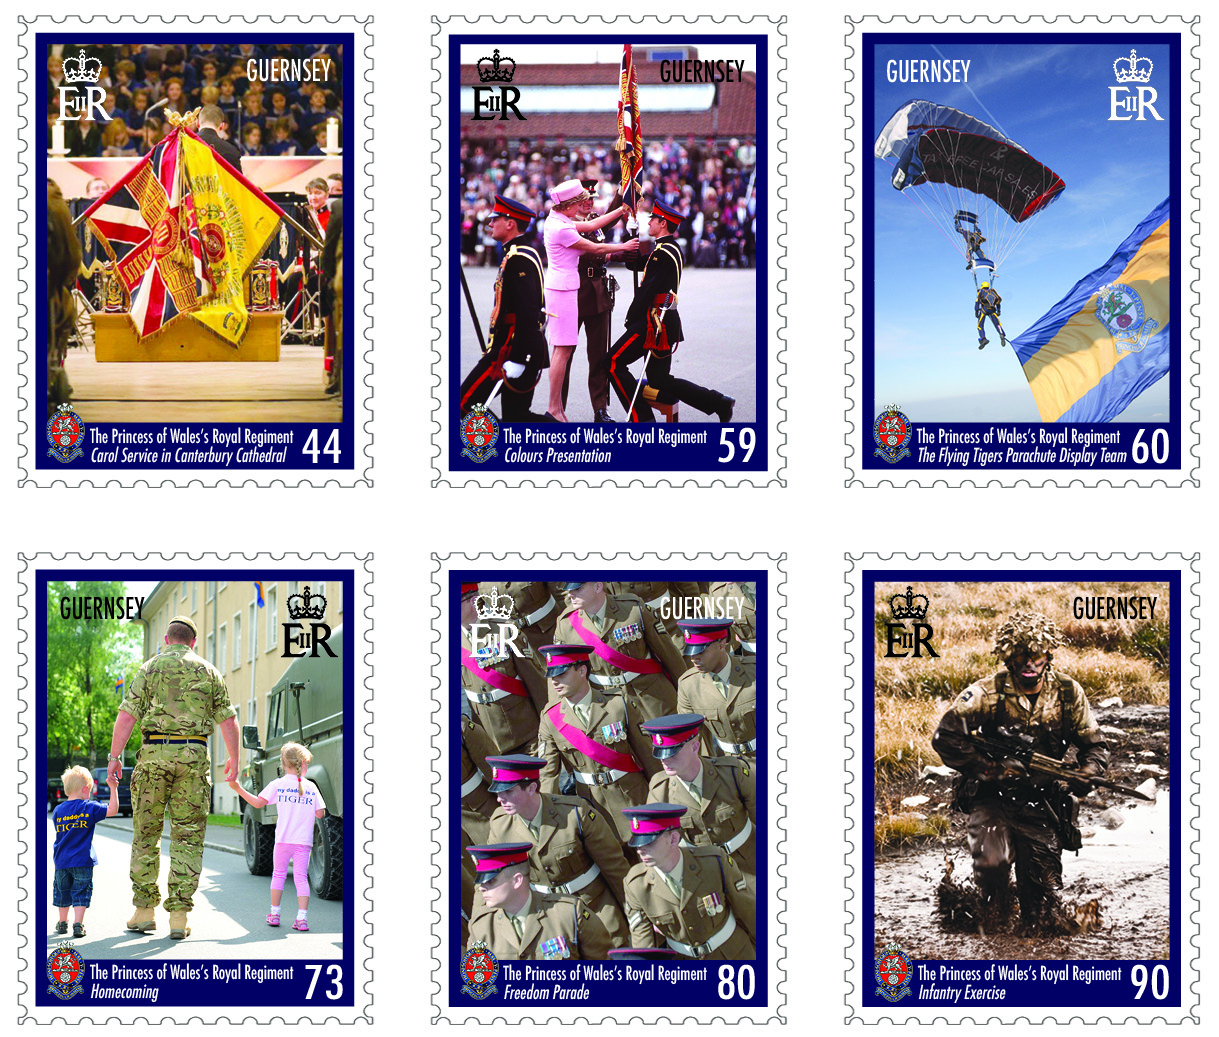 25th anniversary of The Princess of Wales's Royal Regiment celebrated with stamps